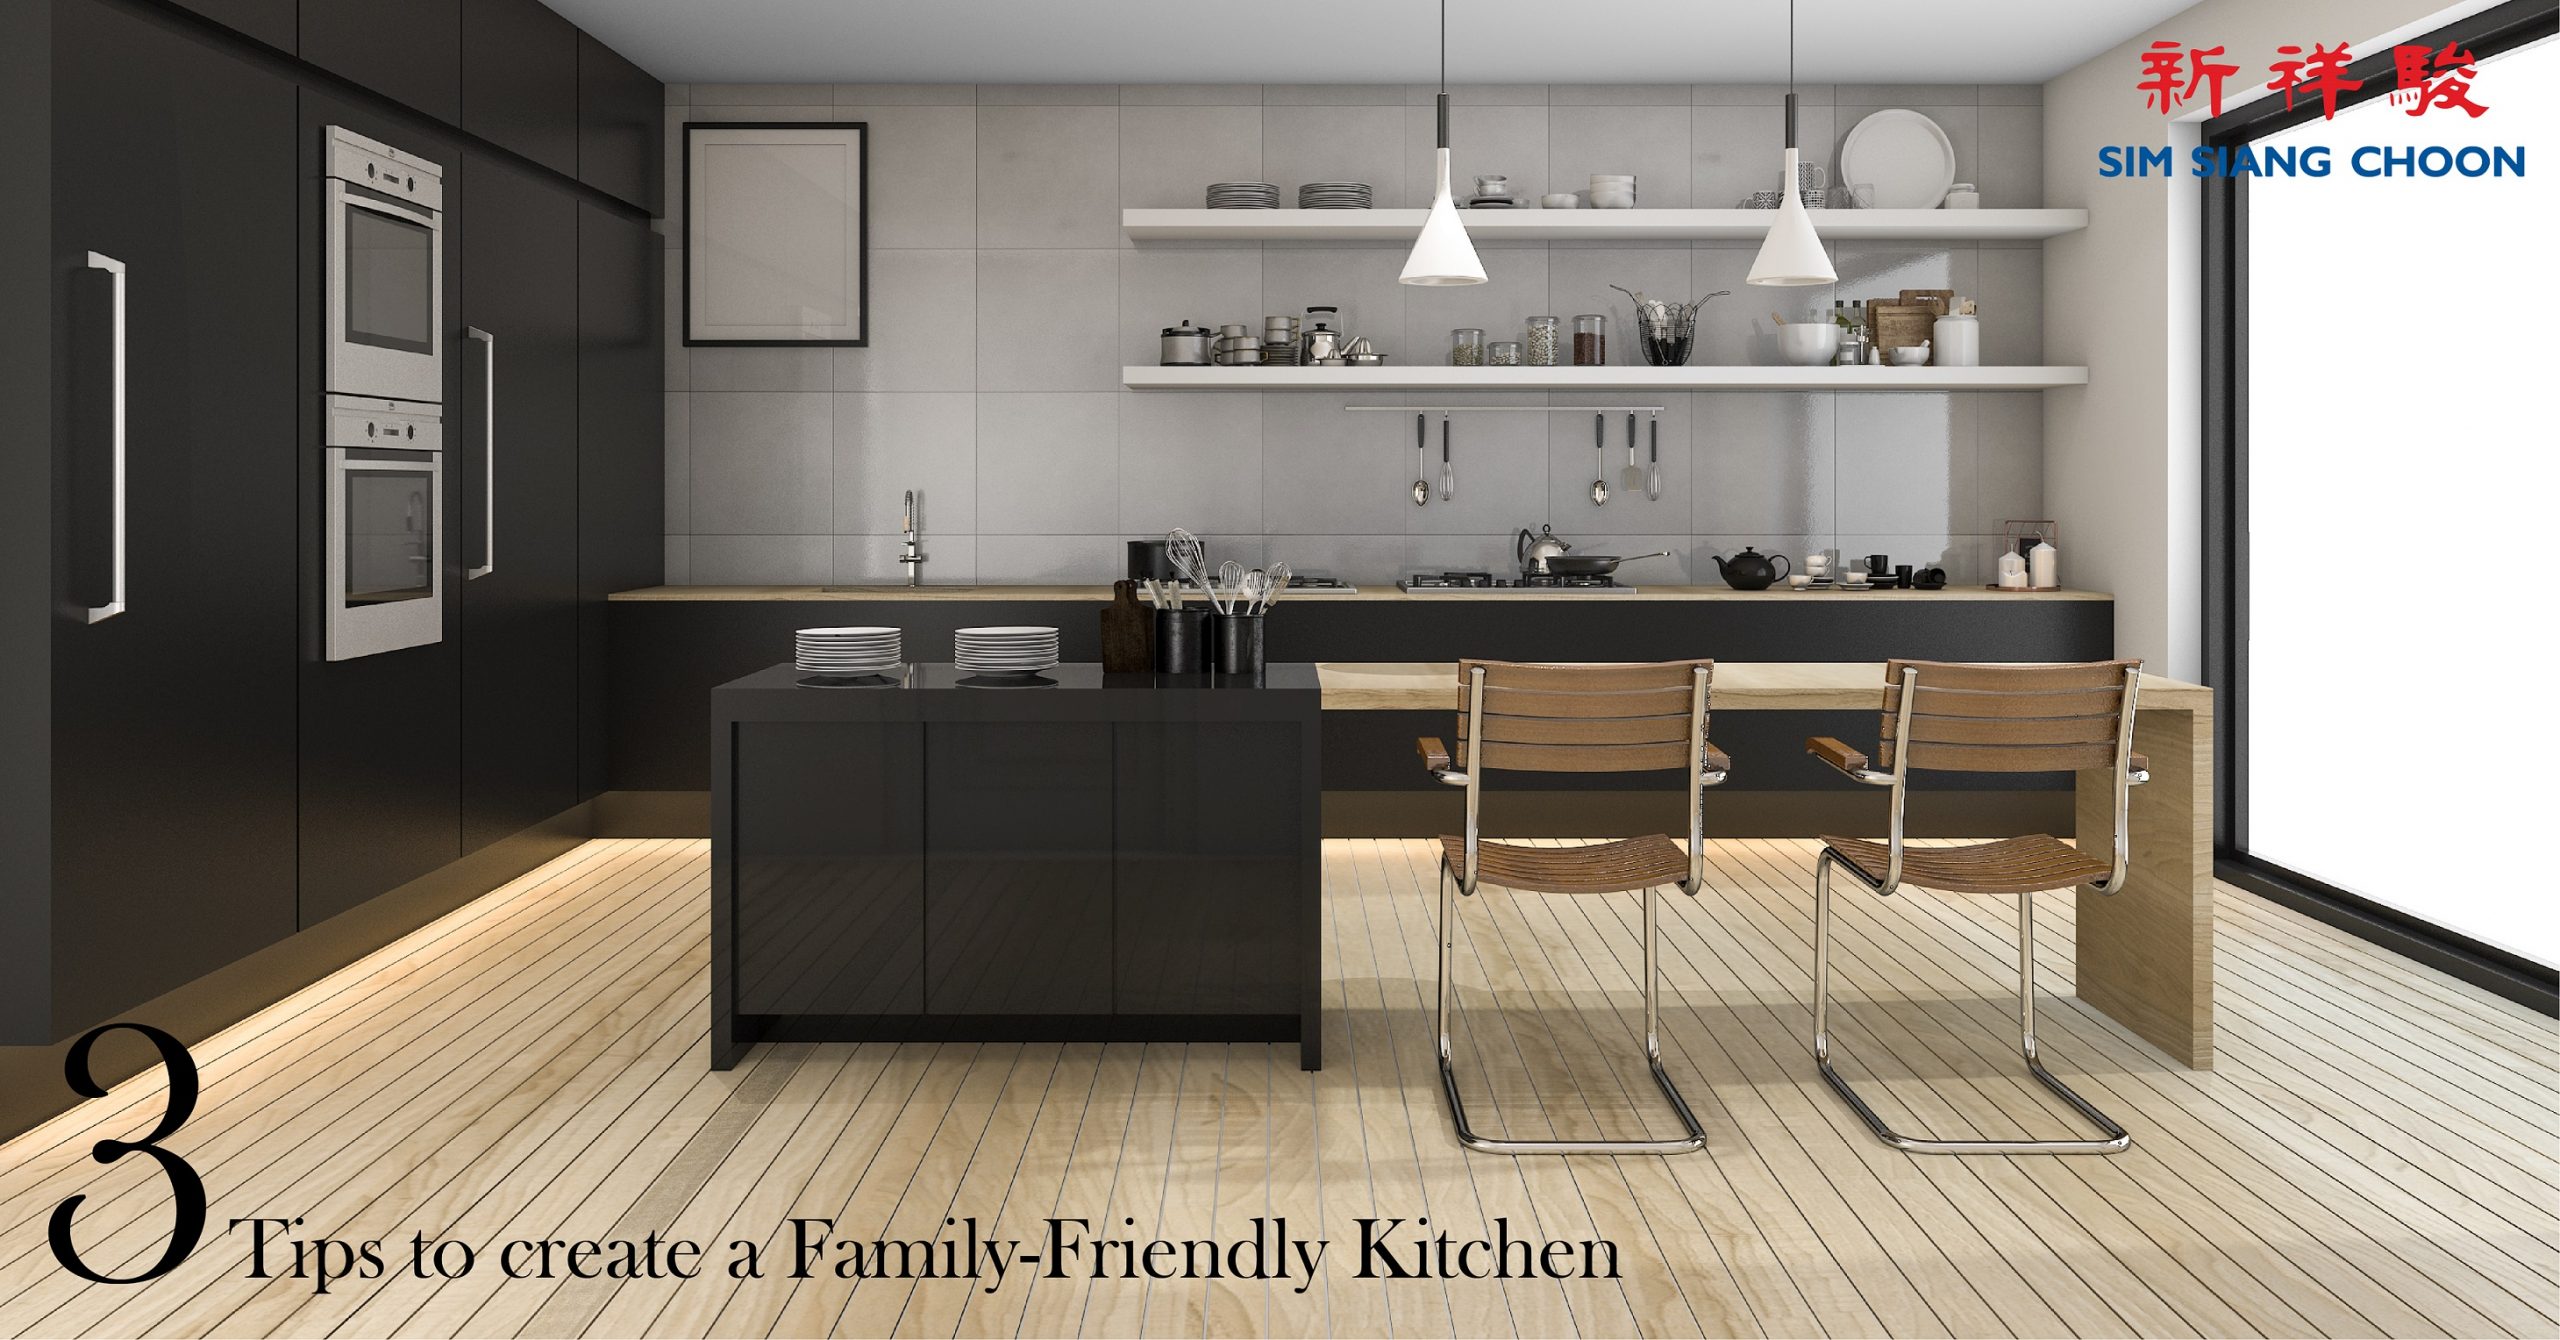 3 TIPS TO CREATE A FAMILY-FRIENDLY KITCHEN